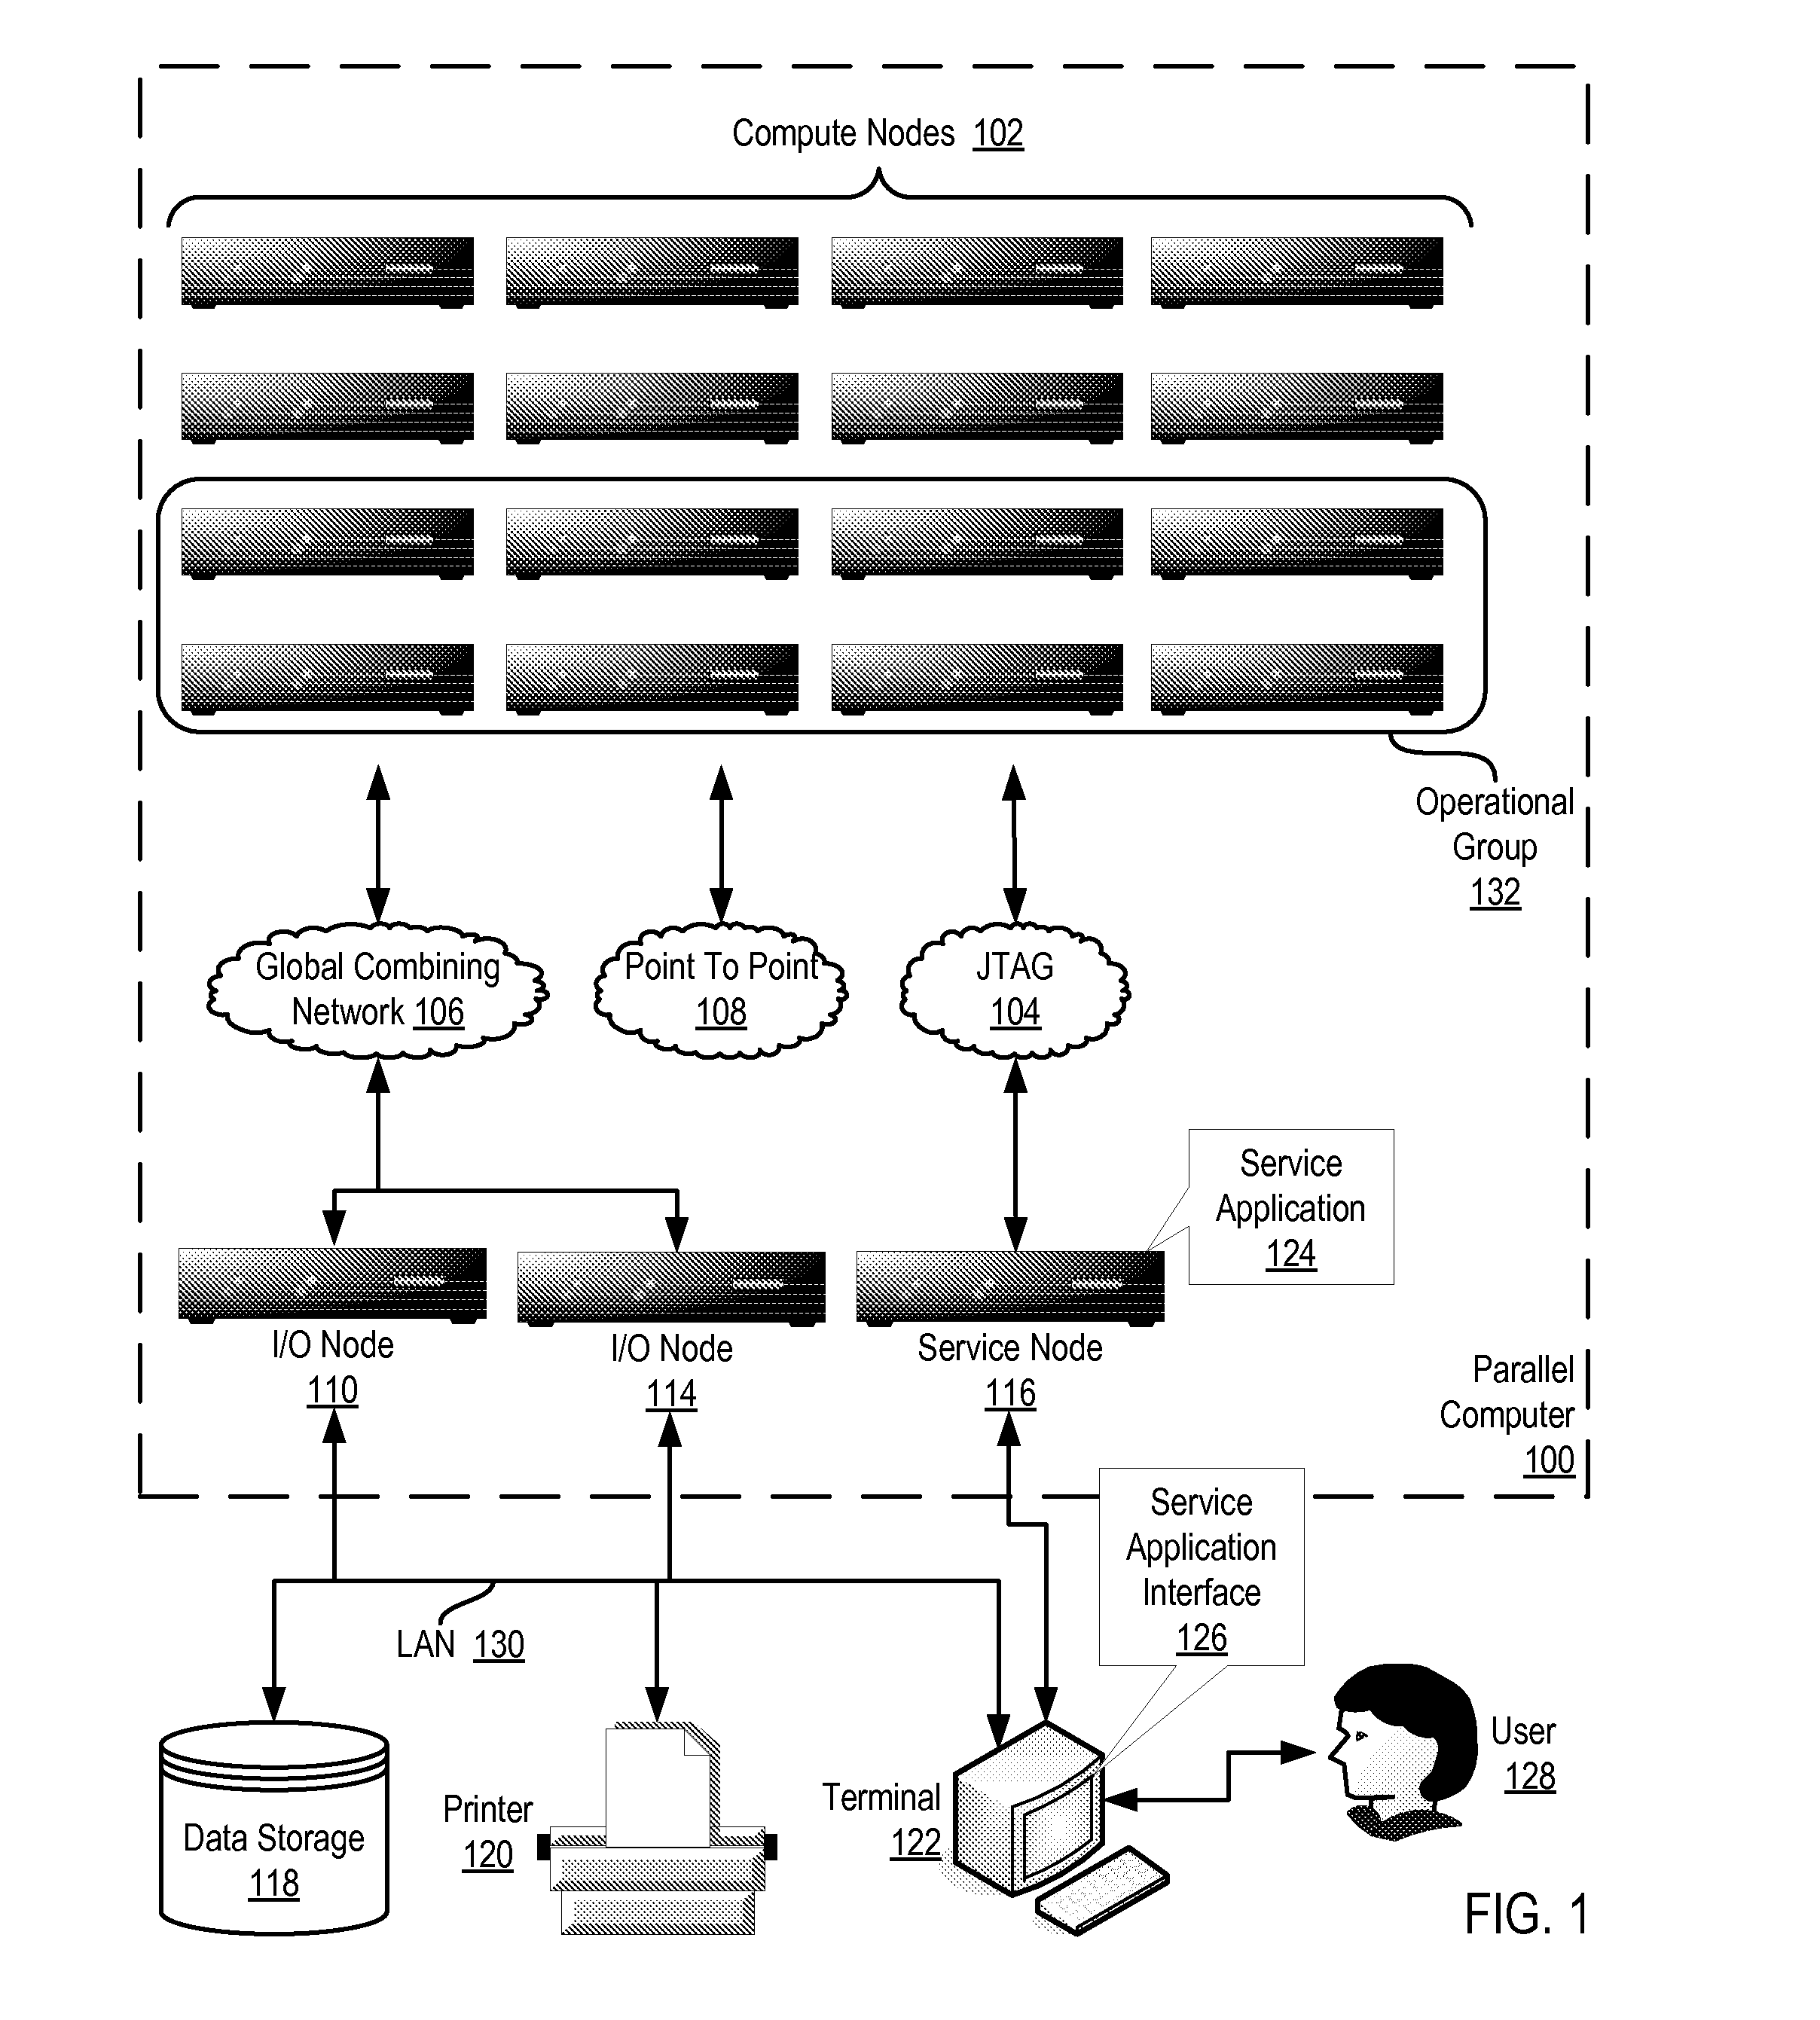 Broadcasting Collective Operation Contributions Throughout A Parallel Computer